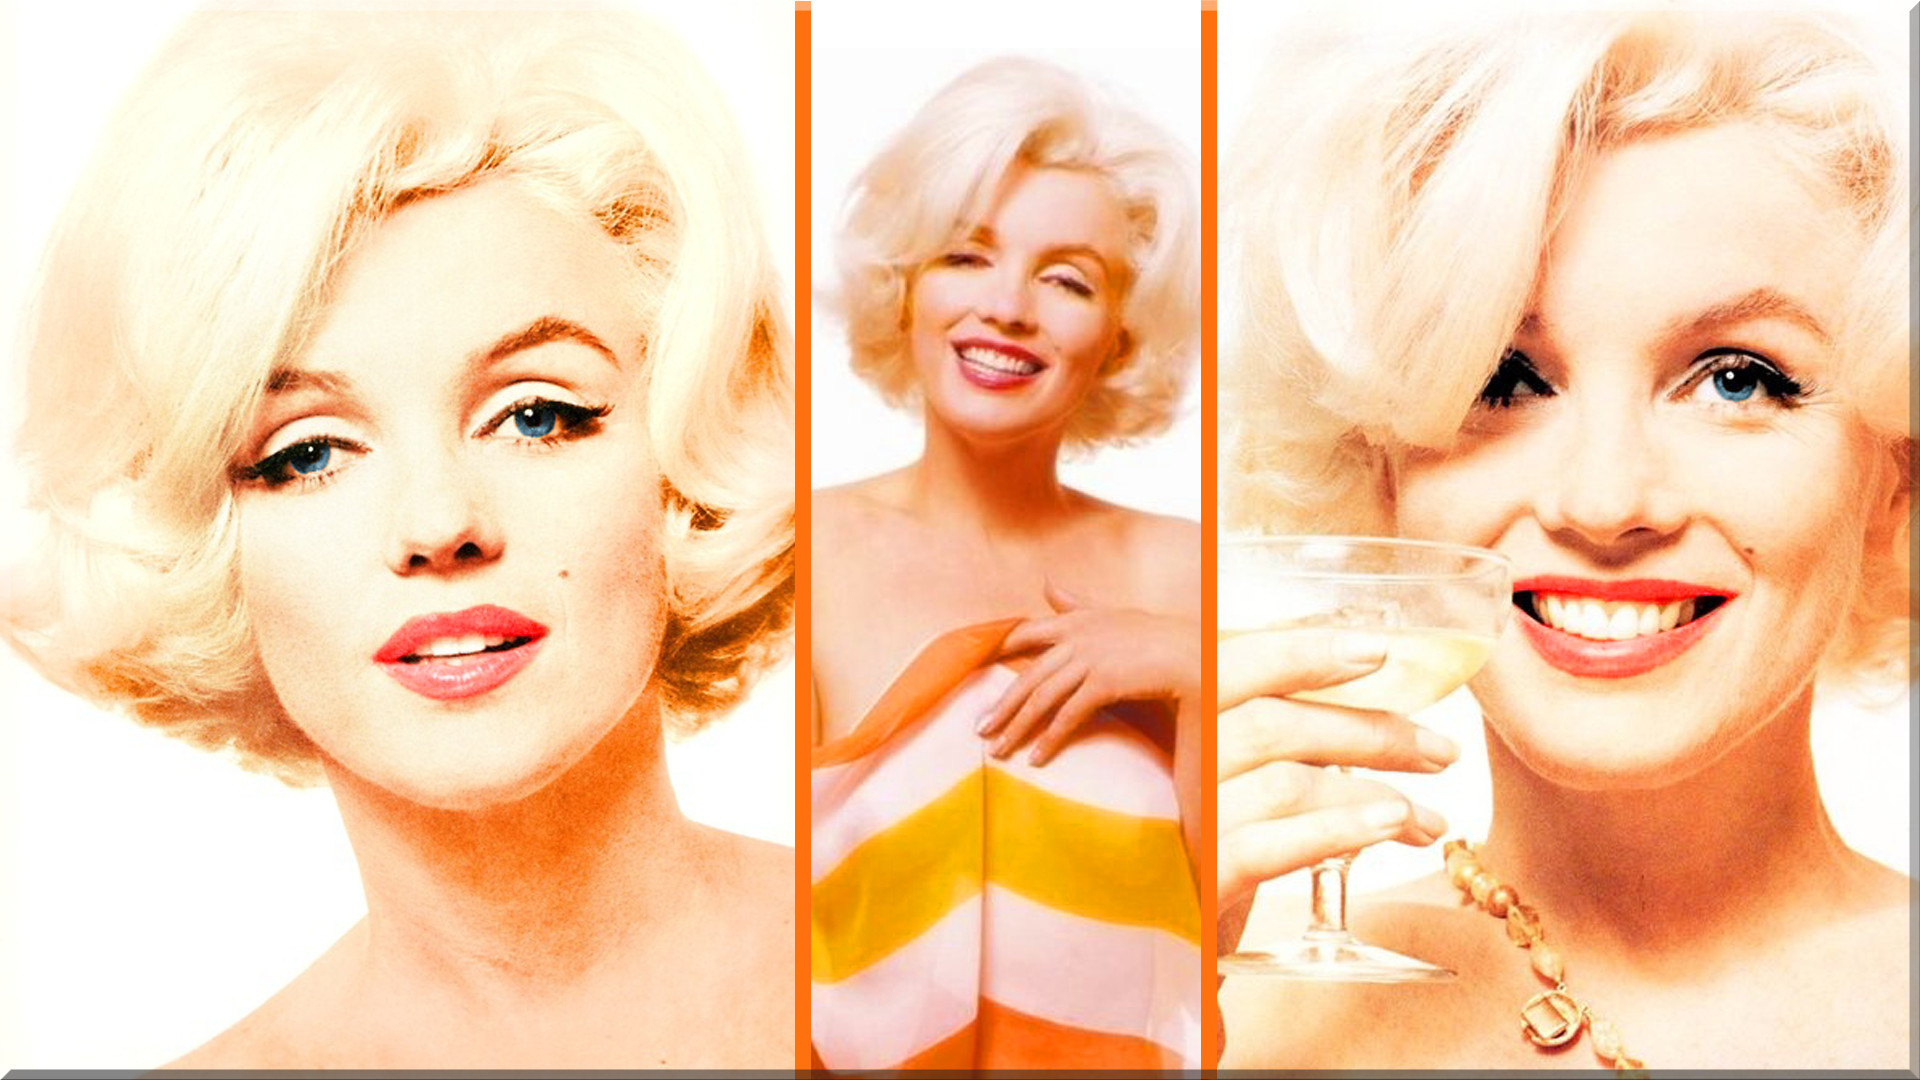 1920x1080 marilyn monroe wallpaper for bedroom wall art andy warhol by hd wallpapers  daily inspired ebay ideas ...